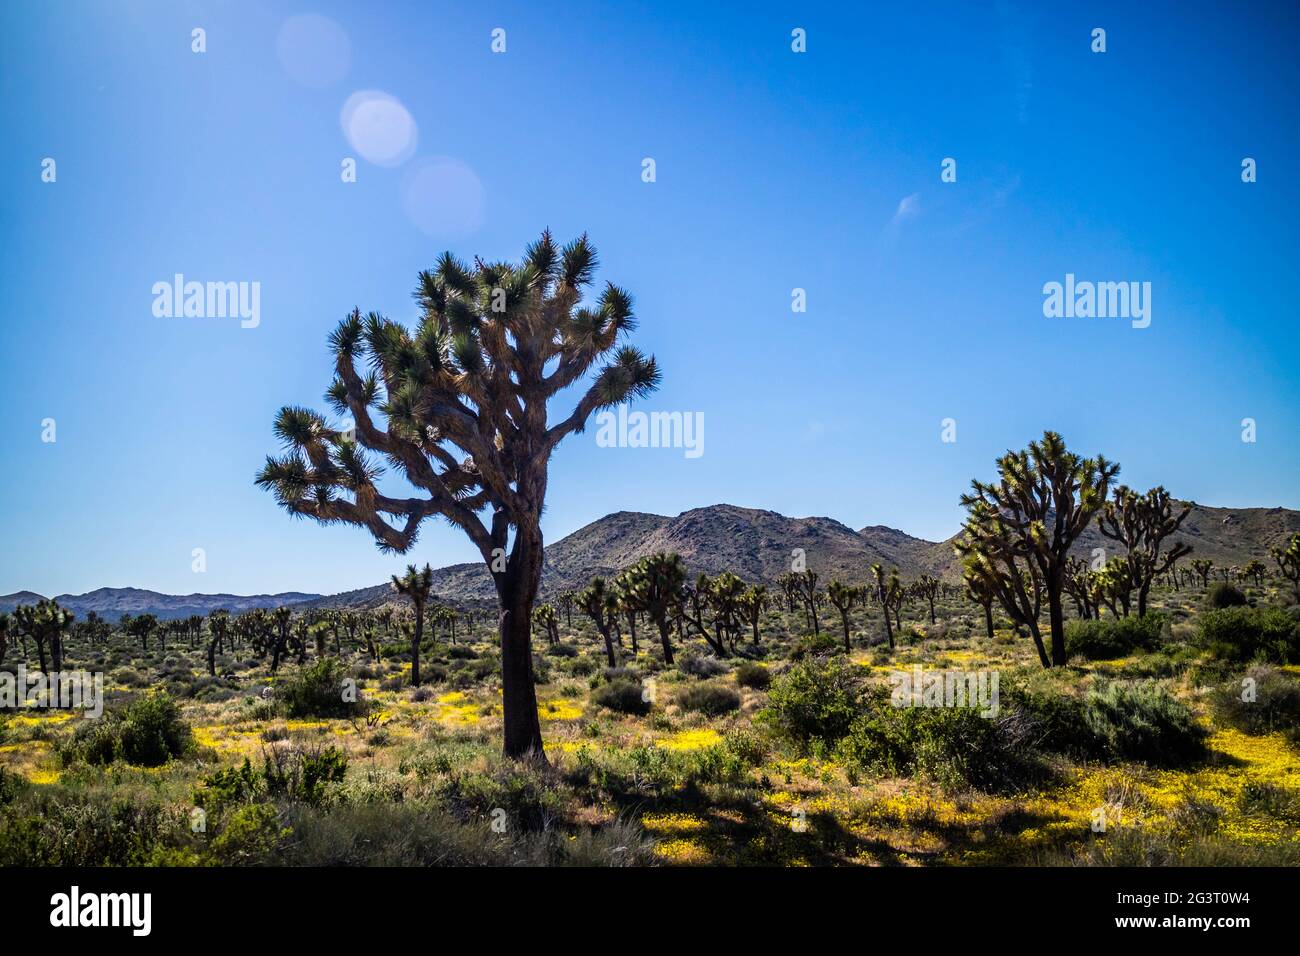 Joshua Trees in Joshua Tree National Park, Californie Banque D'Images